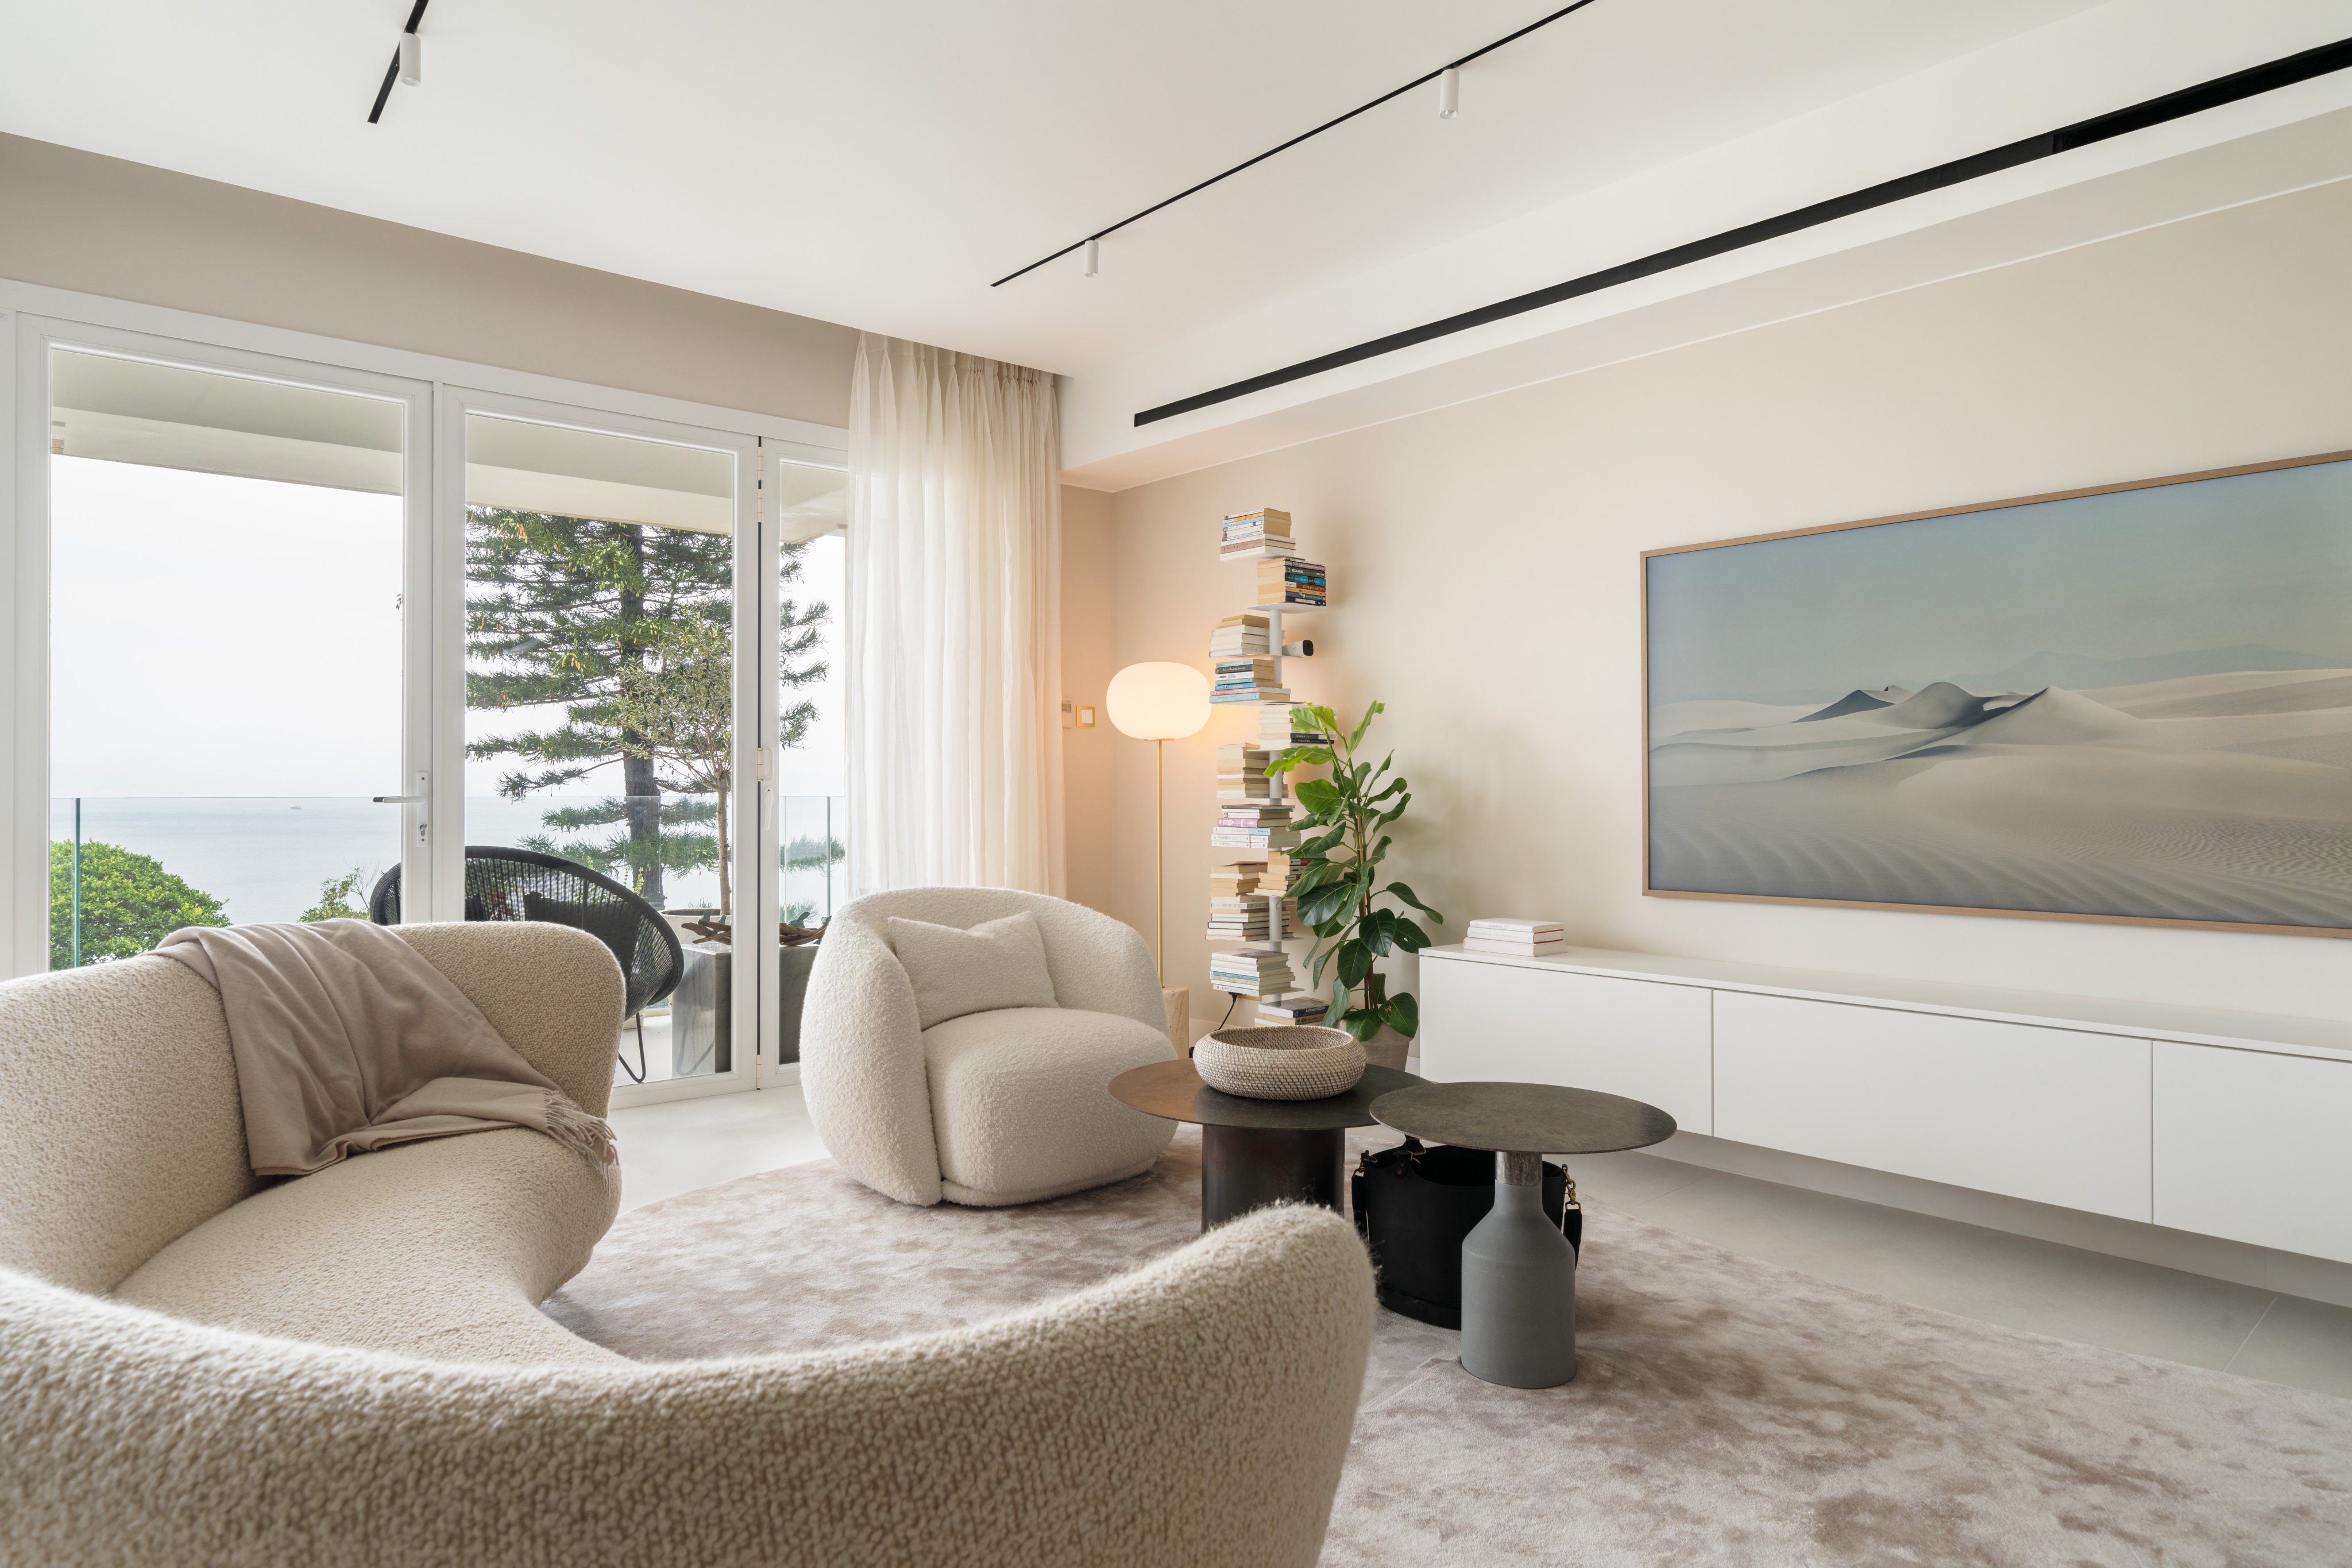 The living room of a two-storey duplex family apartment in Repulse Bay, Hong Kong, shows the muted colour palette that makes its sea views the focus. Photo: Dela Peri John David Adecer